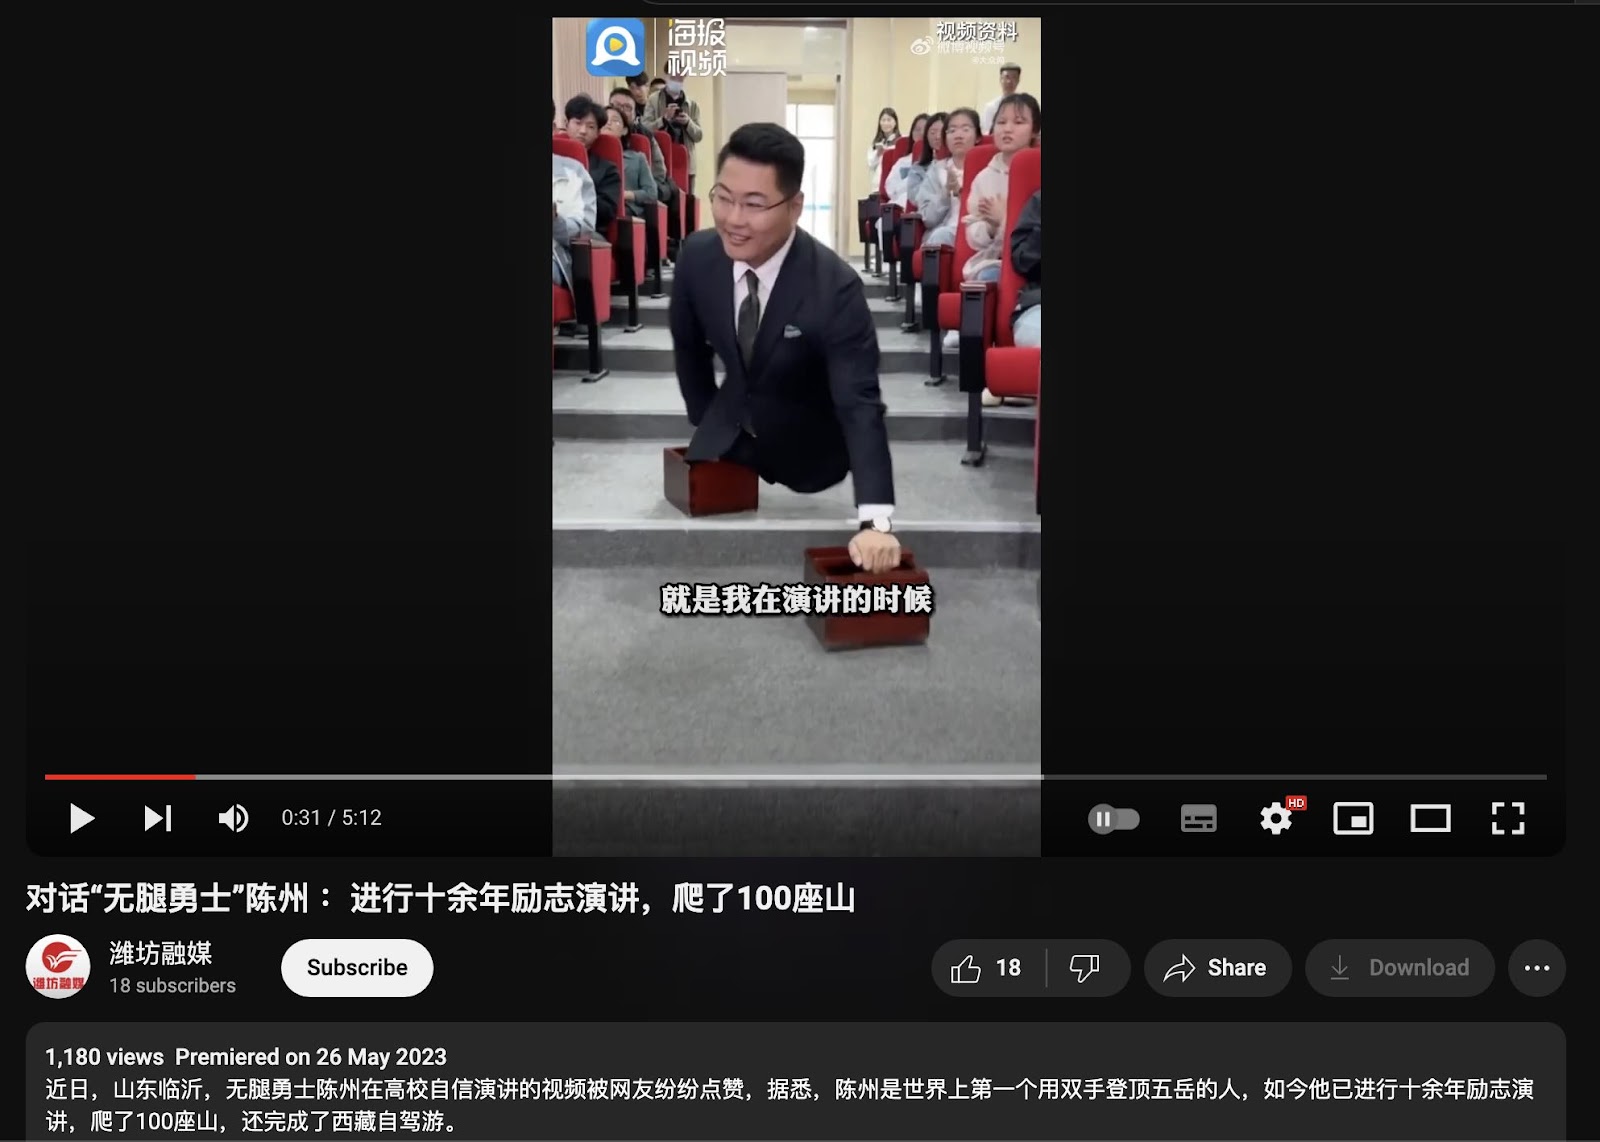 A video of a Chinese motivational speaker is being falsely shared as the  founder of TikTok Zhang Yiming. - FACTLY